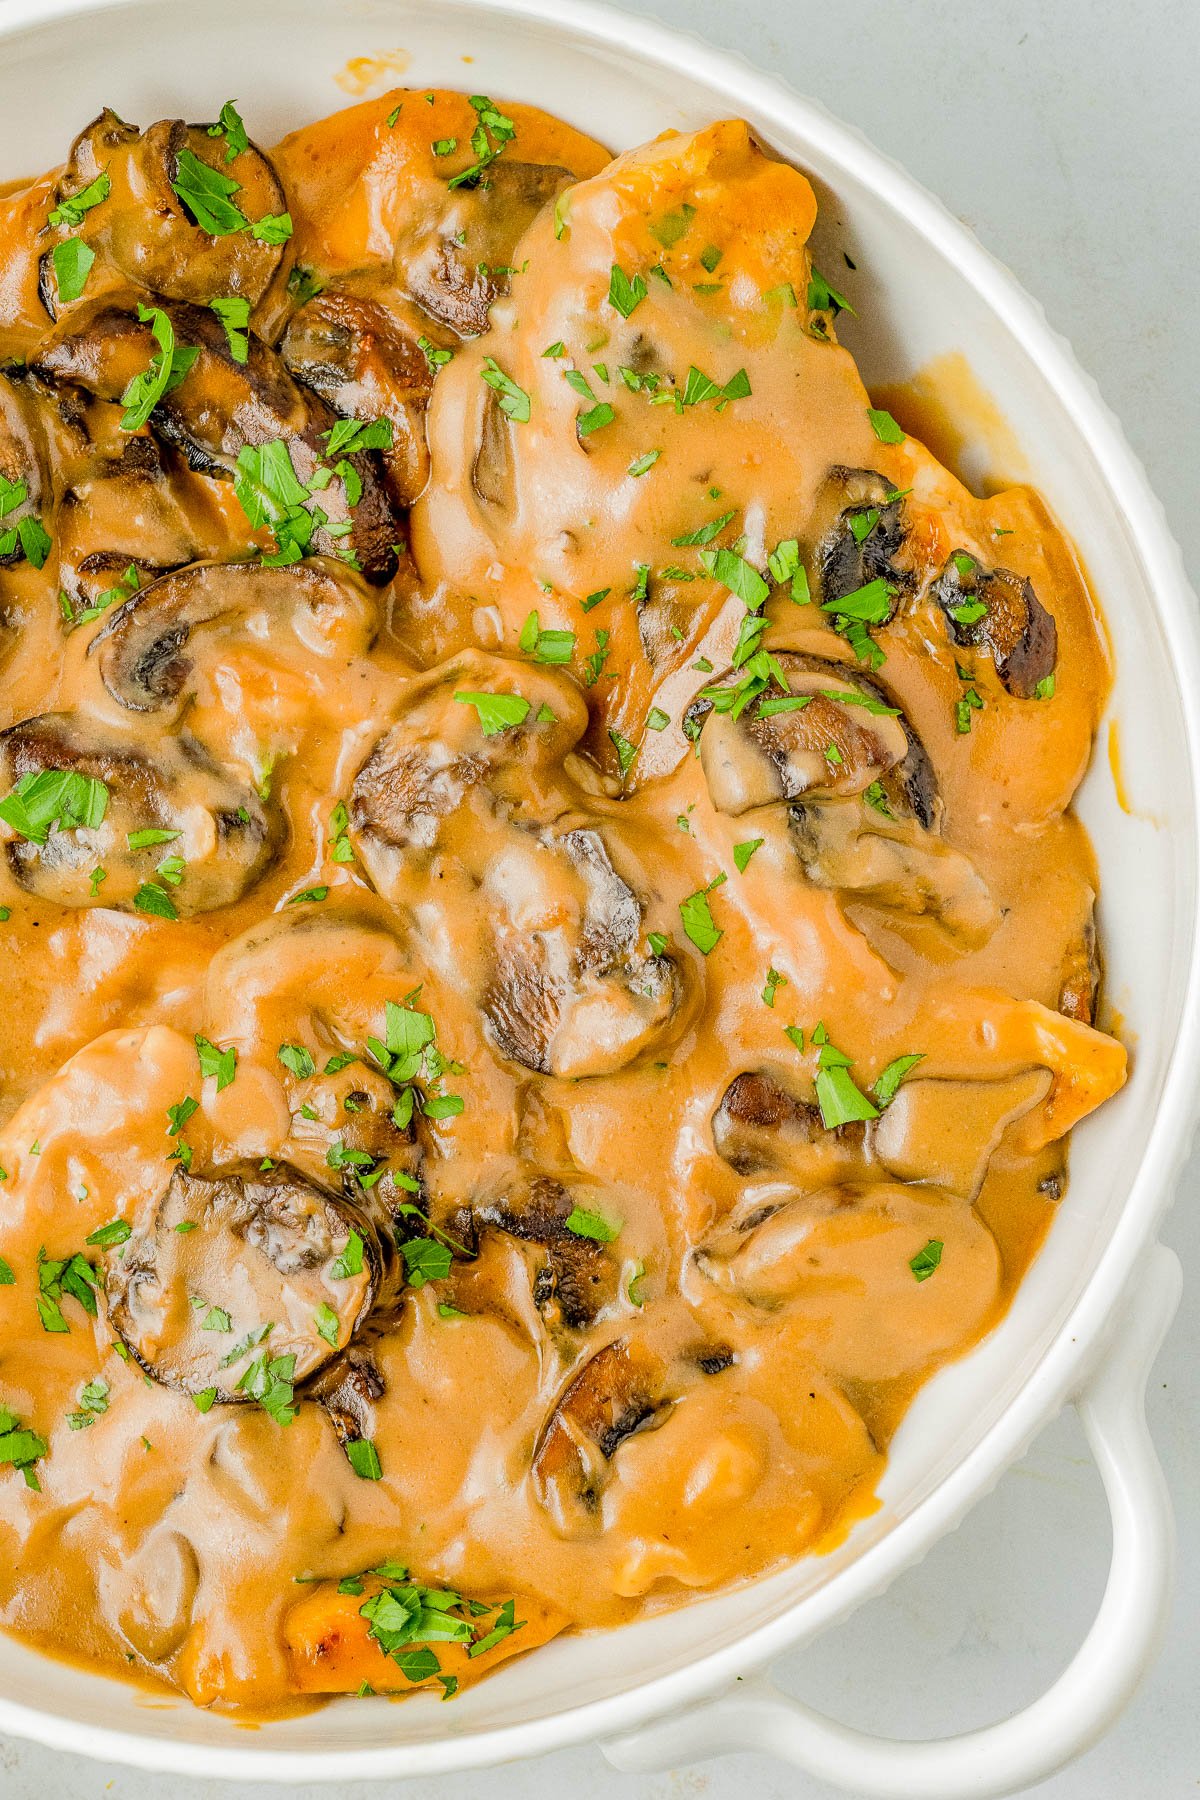 Slow Cooker Chicken Marsala – This classic comfort food recipe is complete with tender chicken breasts that are slow cooked with mushrooms and herbs in a flavorful creamy Marsala wine sauce! The rich sauce makes the perfect gravy served over rice or potatoes. Learn to make this restaurant quality dish at home in your Crock-Pot so that it's EASY enough for weeknight dinners!